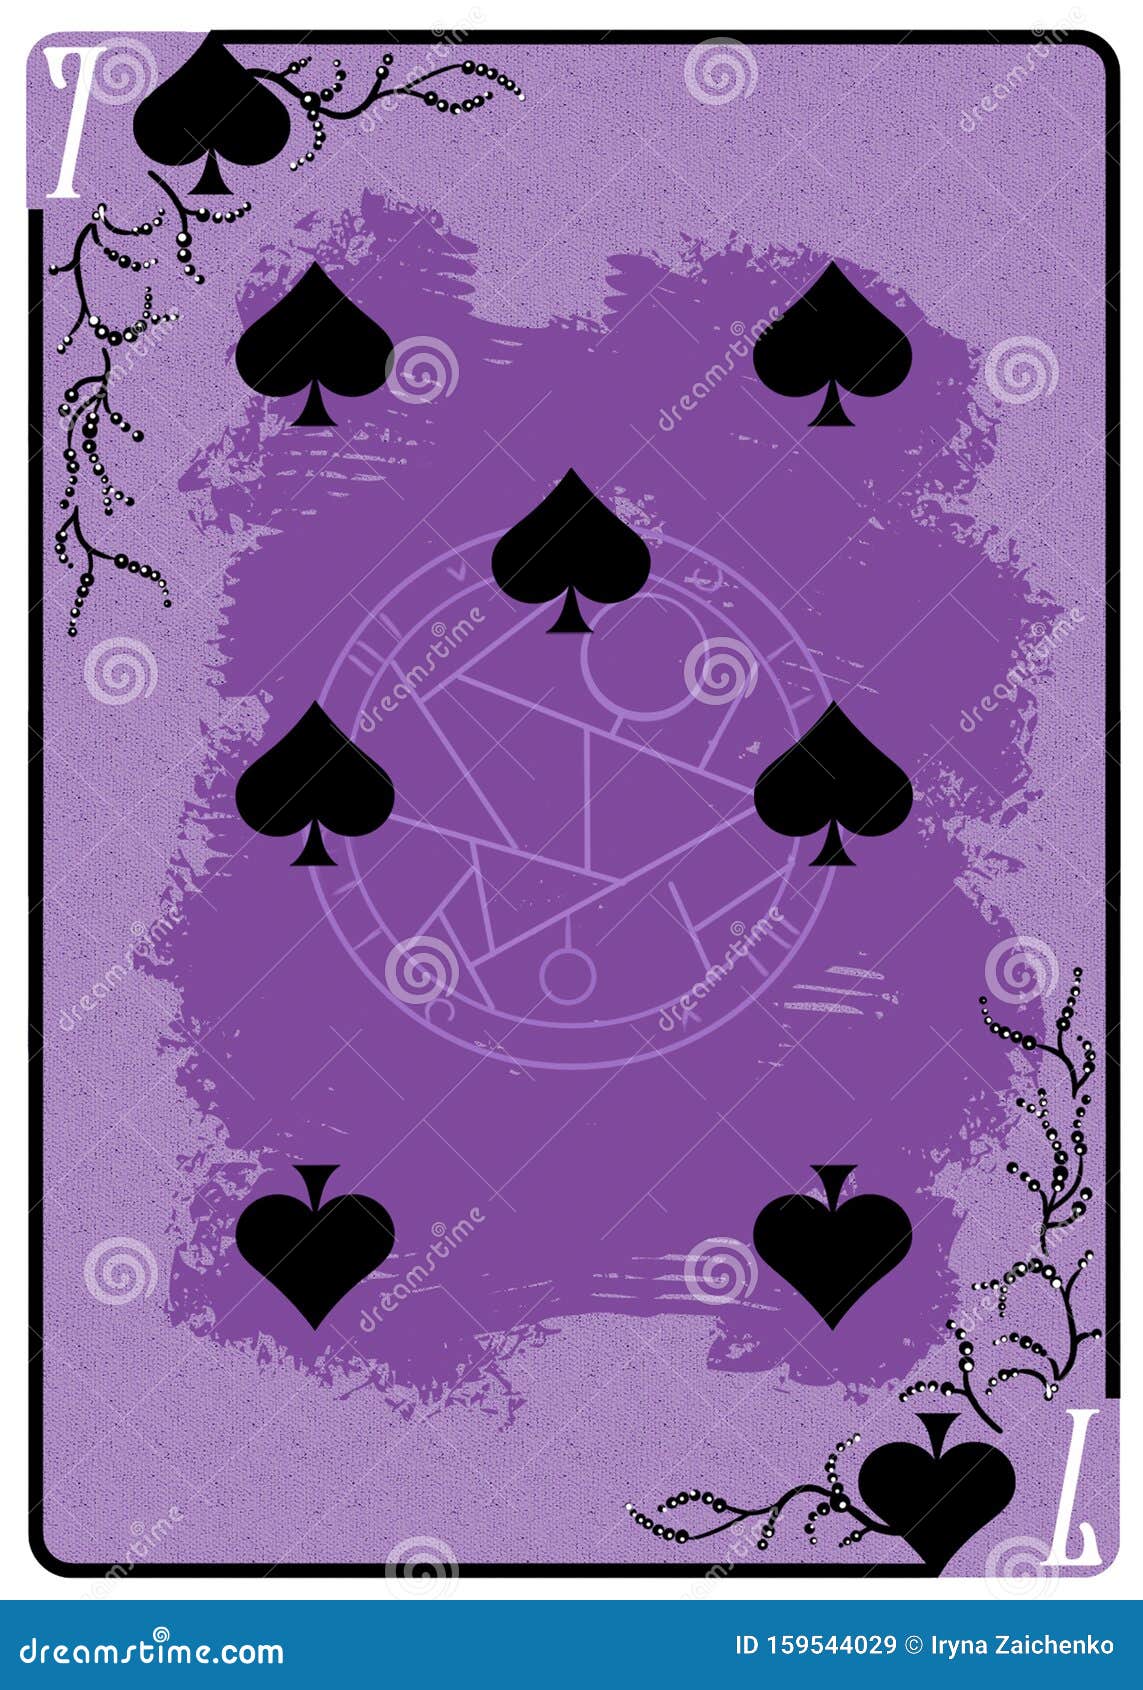 seven of spades playing card. unique hand drawn pocker card. one of 52 cards in french card deck, english or anglo-american